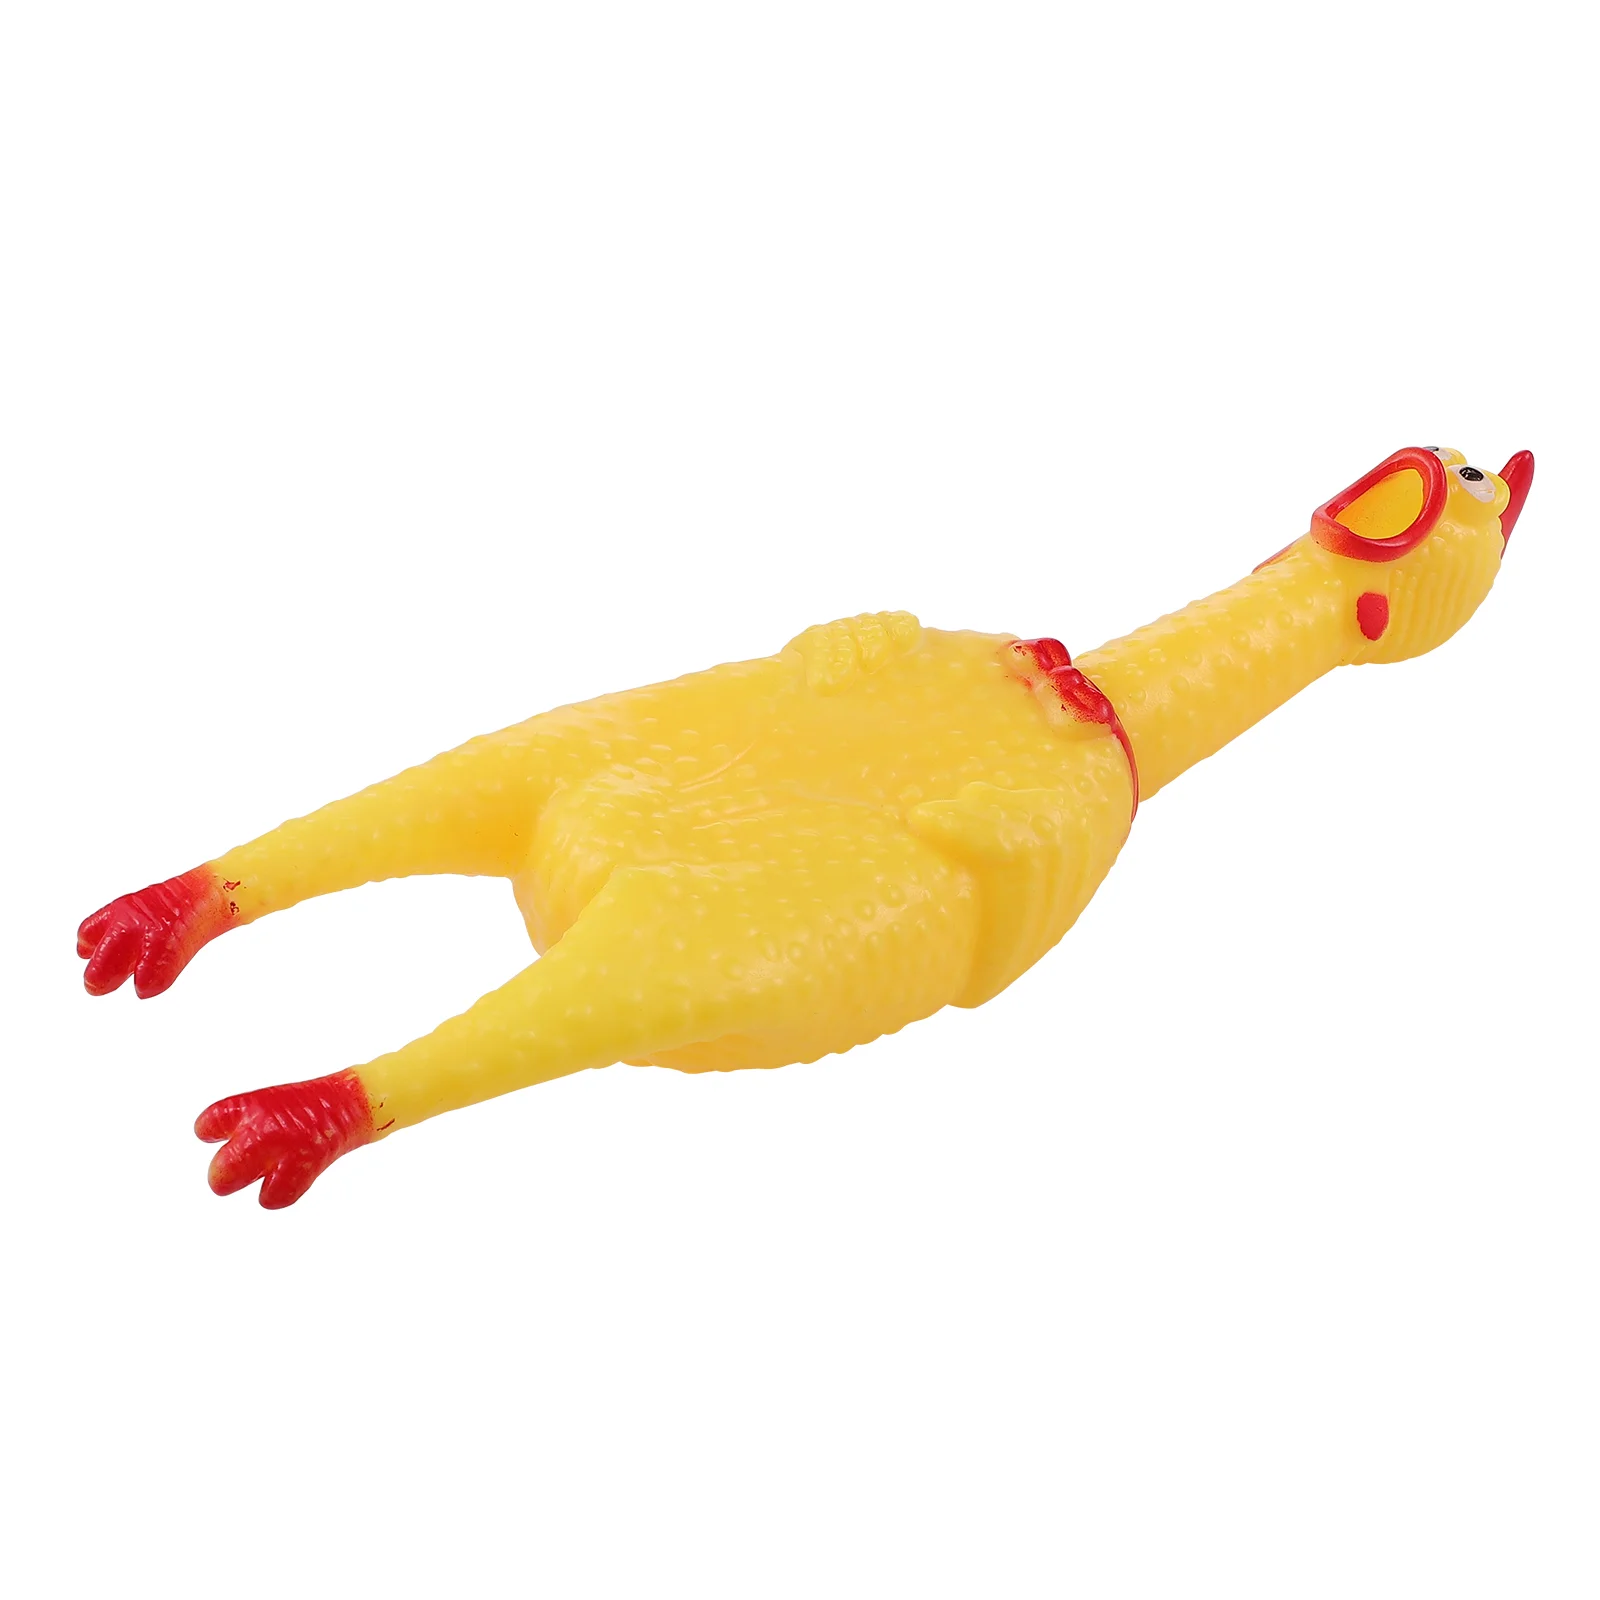 Inflatable rubber chicken